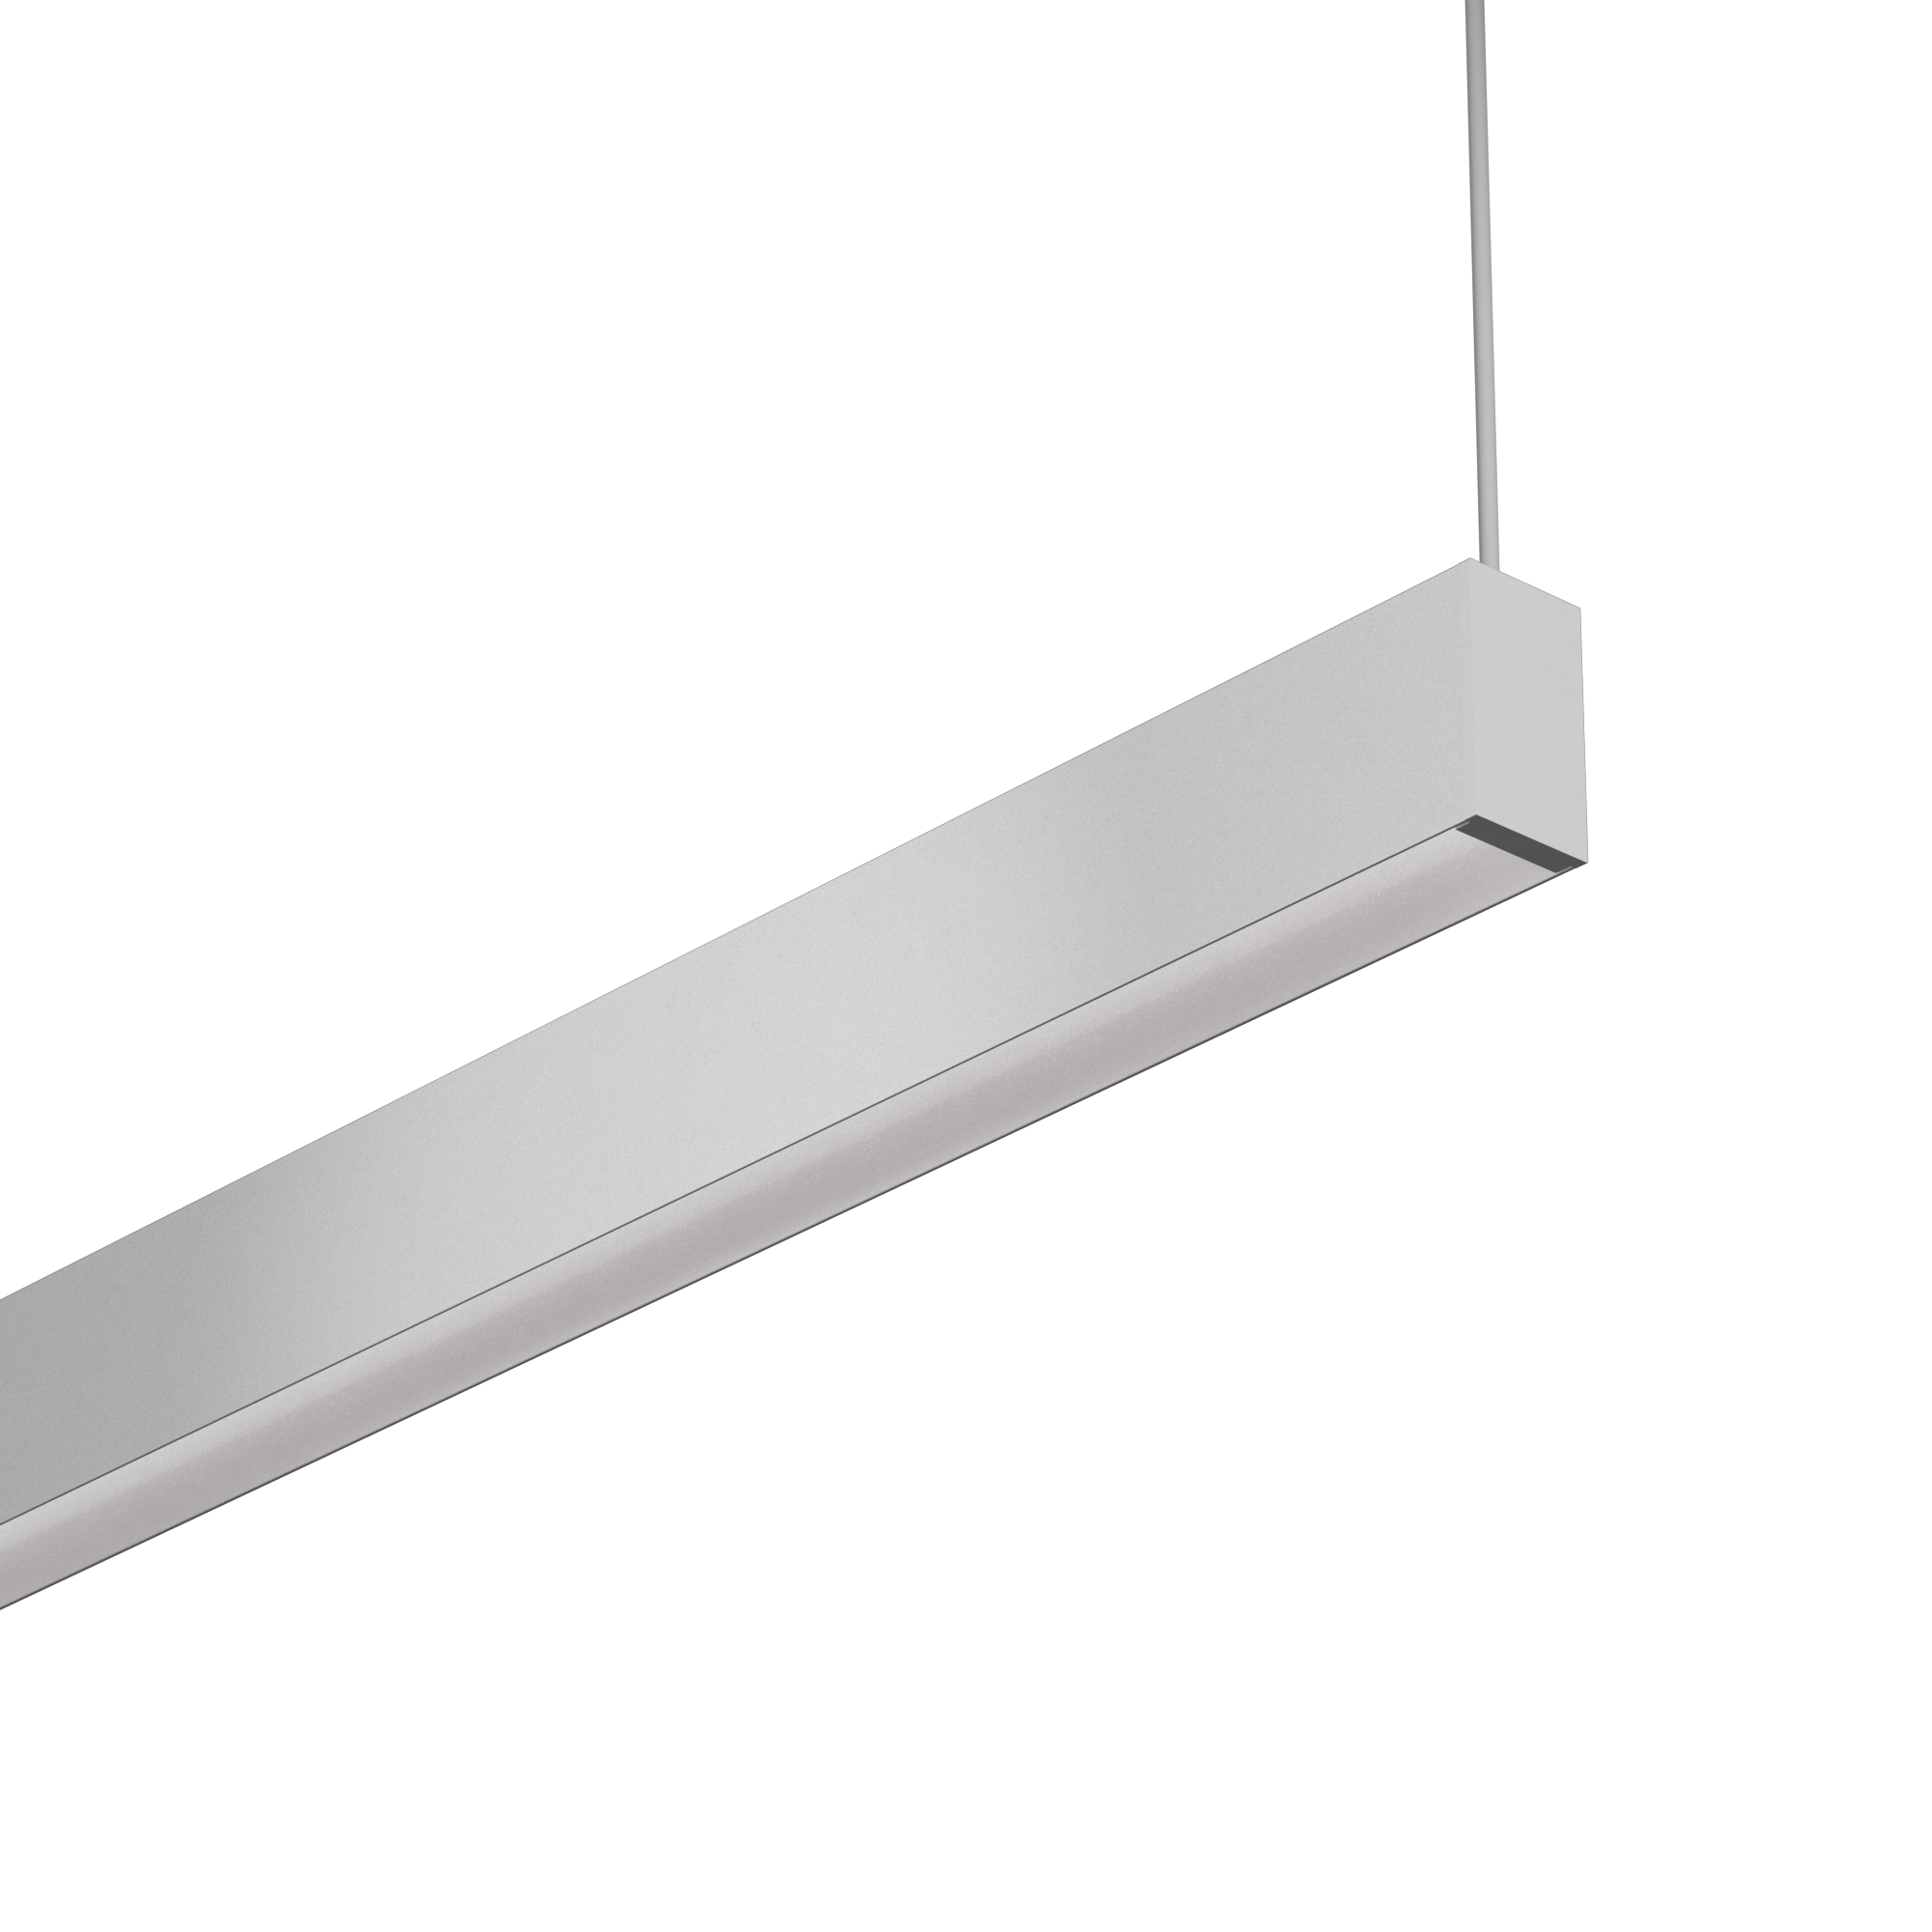 0.95” Ultra-Compact LED Linear
NANOBeam is 0.95” wide, bringing regressed SmartBeam® capabilities to a low-glare form factor that complements architectural space. NANOBeam features a remote driver to remove visual bulk.